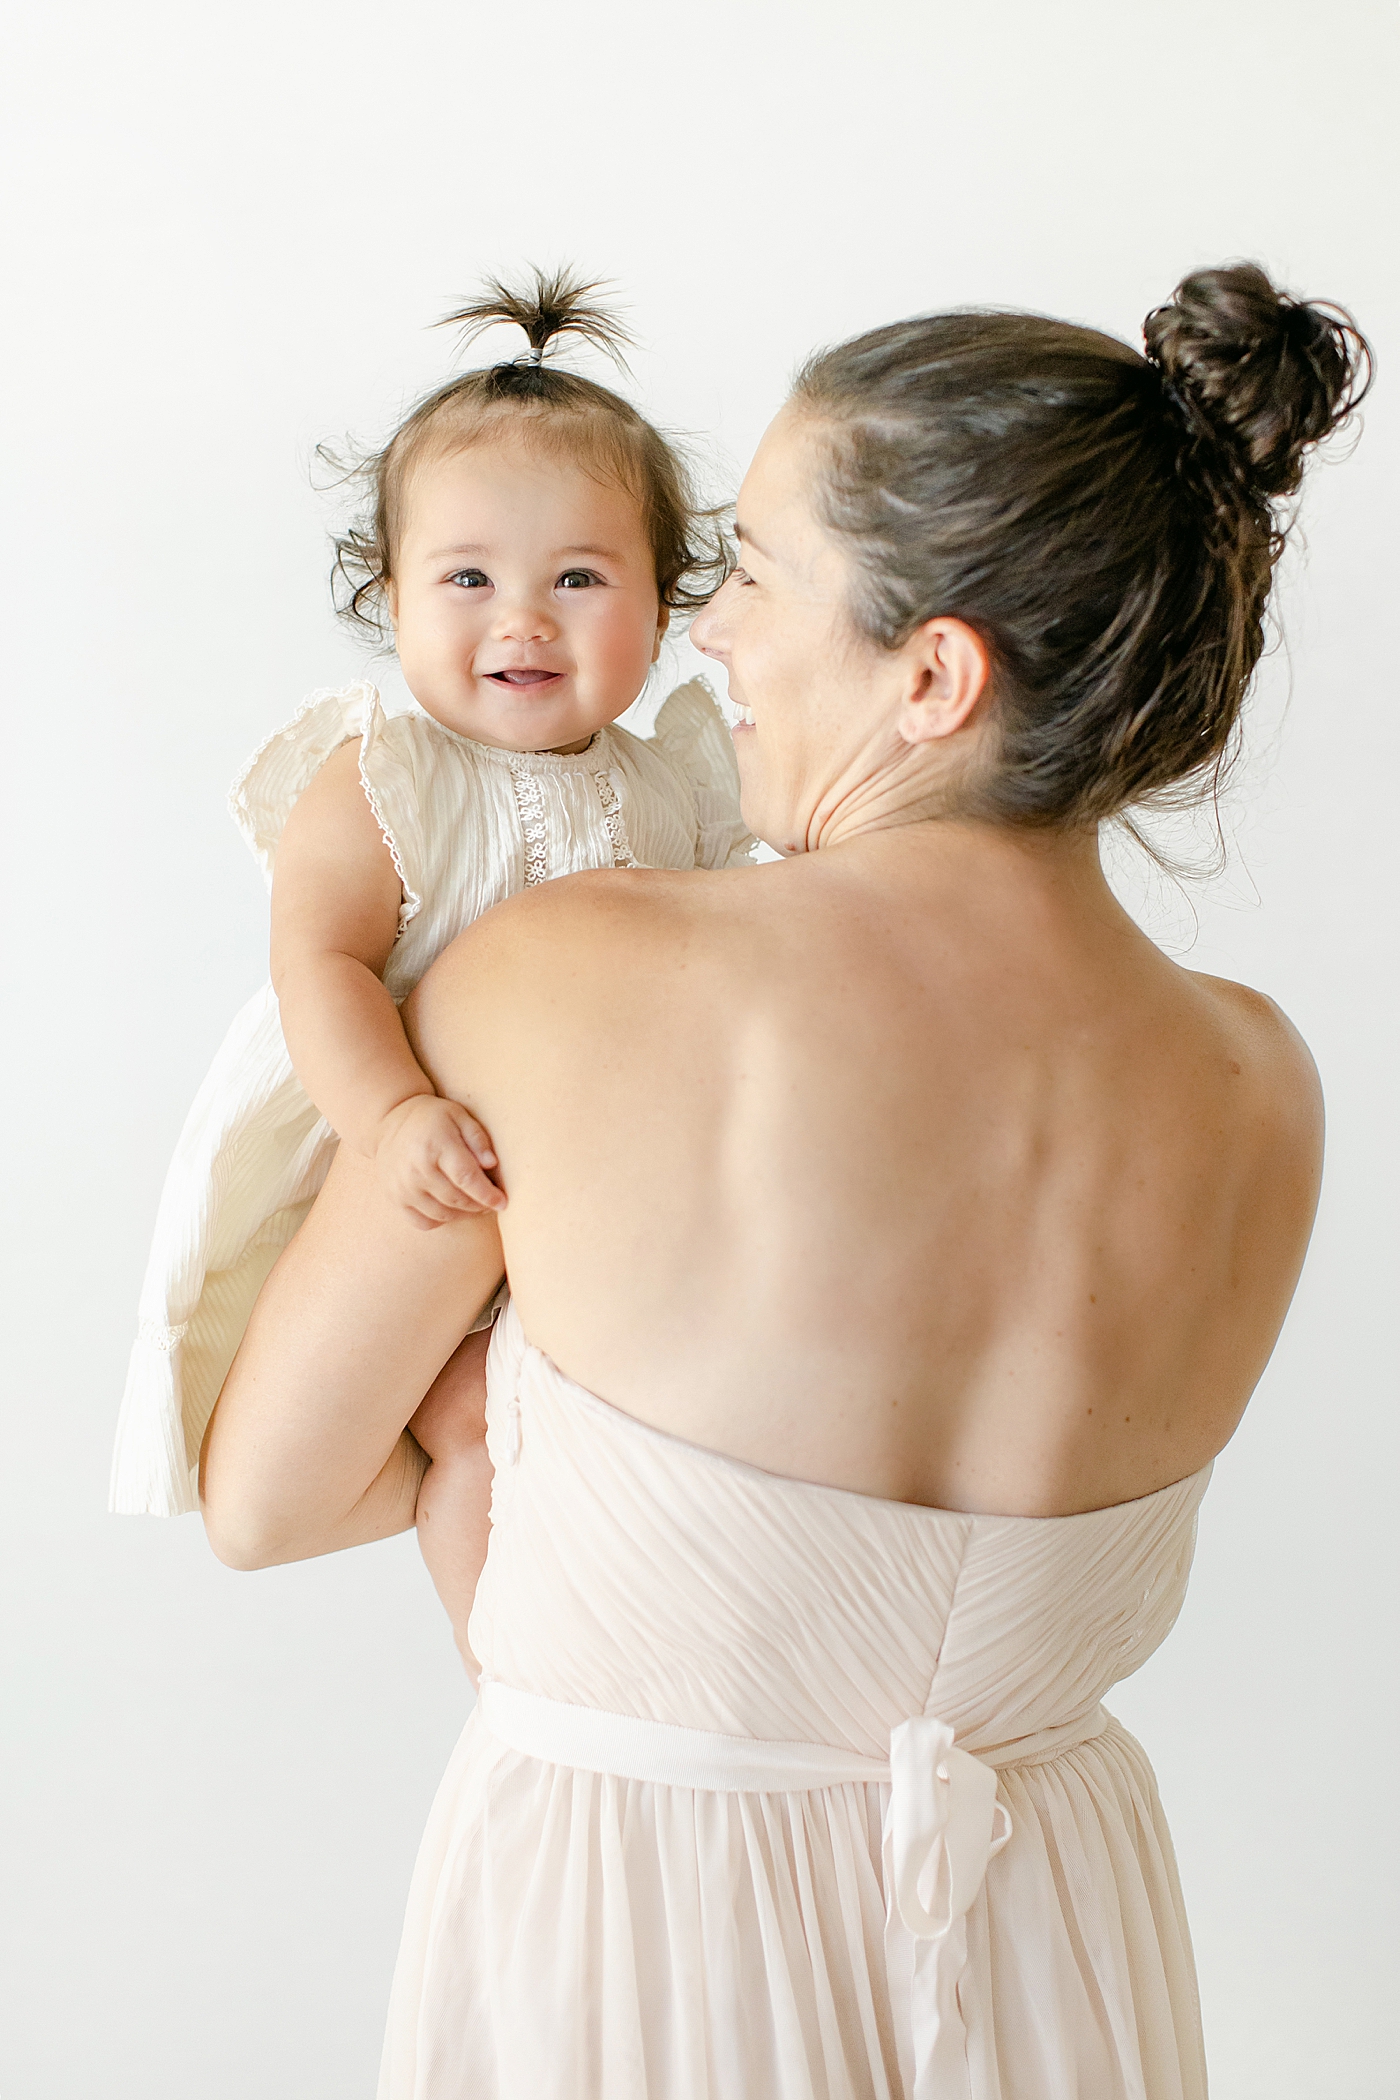 Baby girl in a white dress held by mom in sleeveless pink dress | Image by Chrissy Winchester Photography